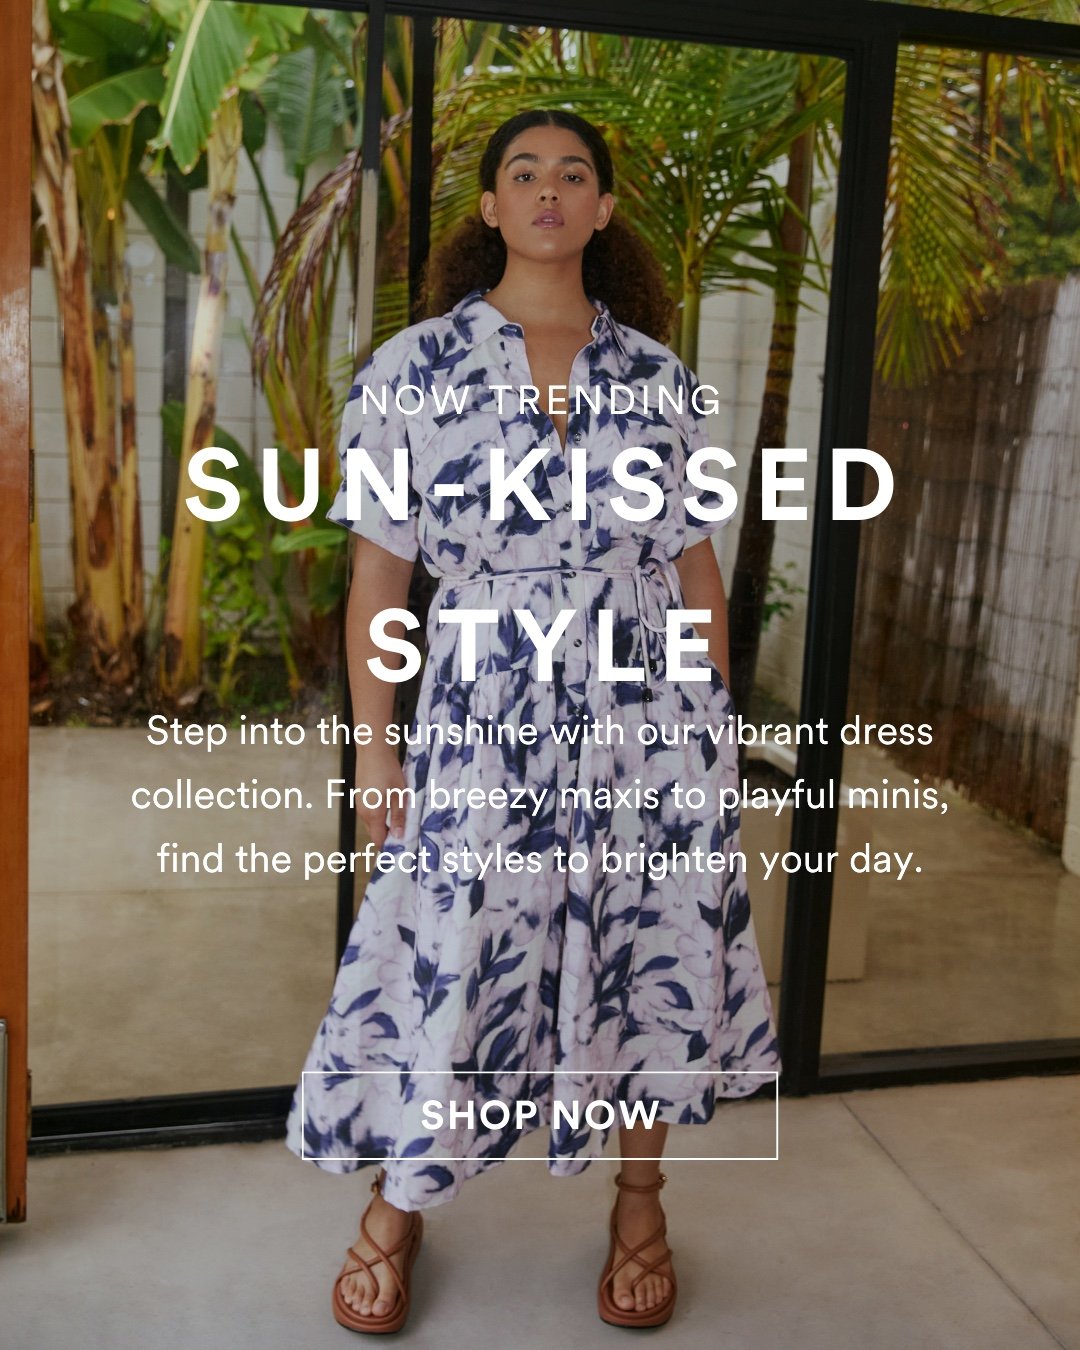 Sun-Kissed StylE NOW TRENDING Step into the sunshine with our vibrant dress collection. From breezy maxis to playful minis, find the perfect styles to brighten your day.